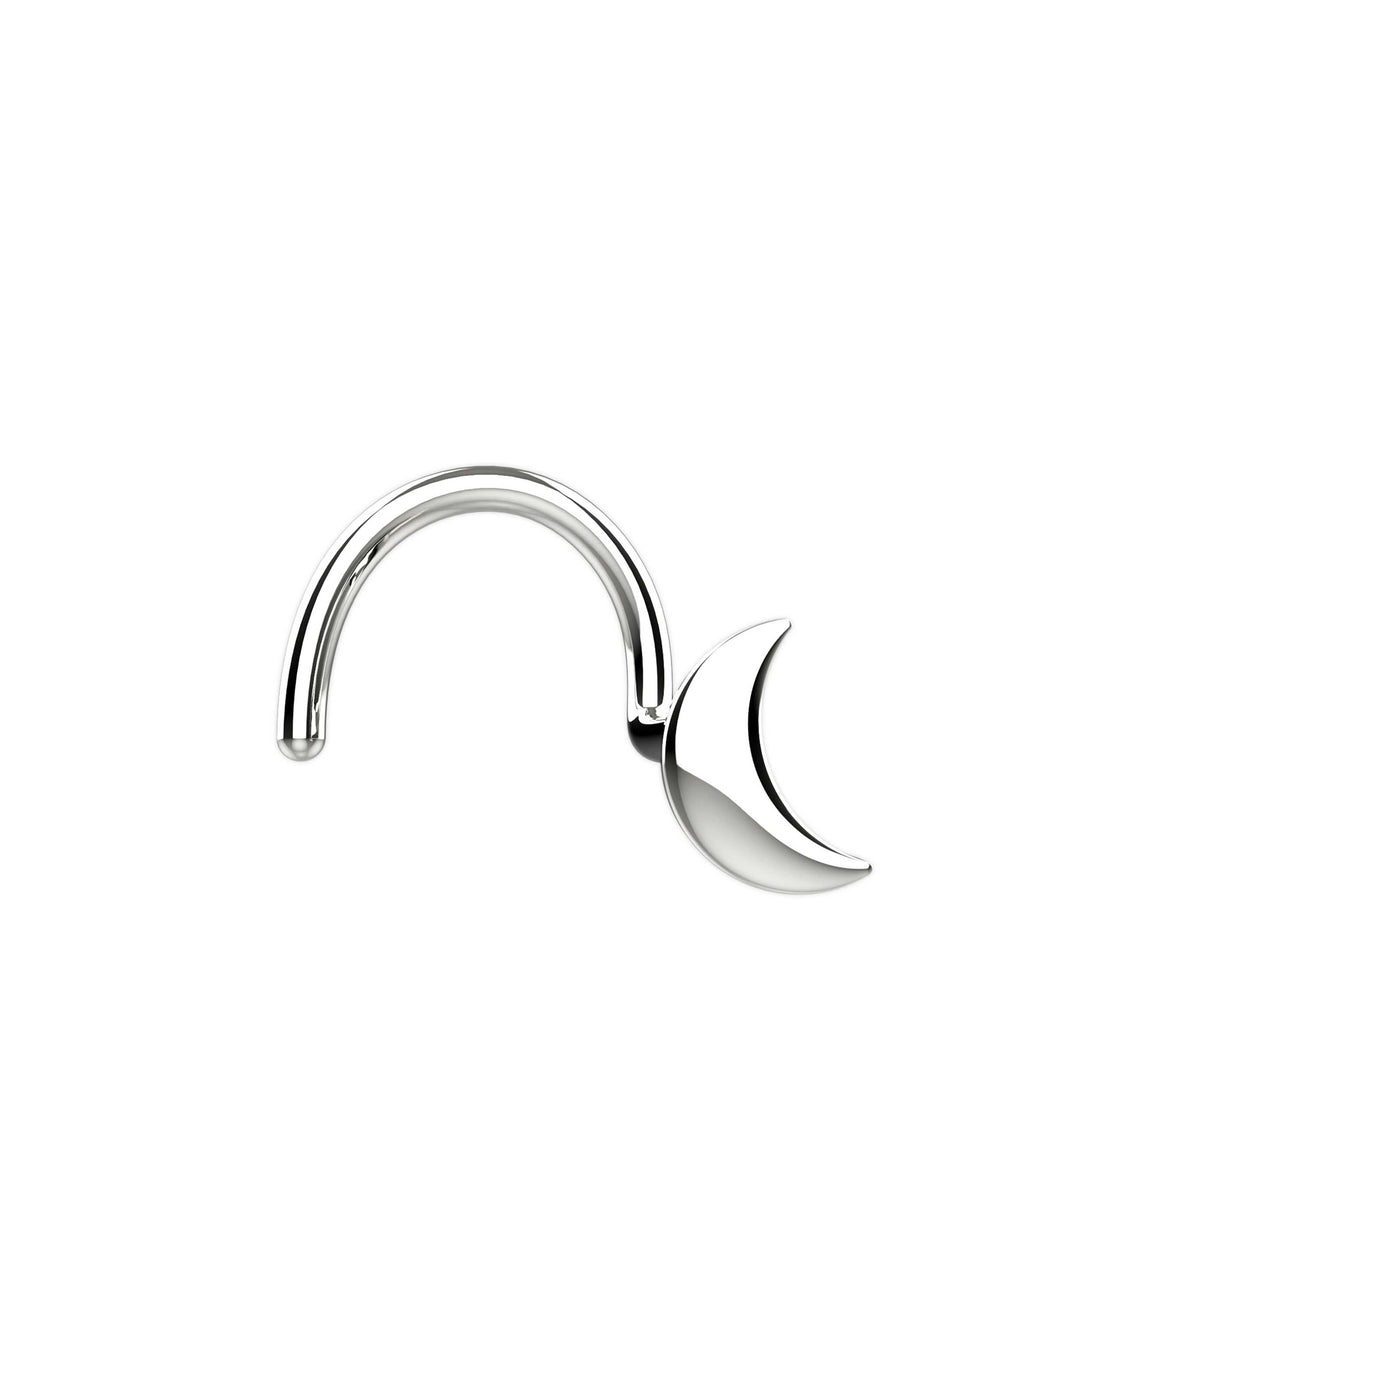 Tiny silver nose rings